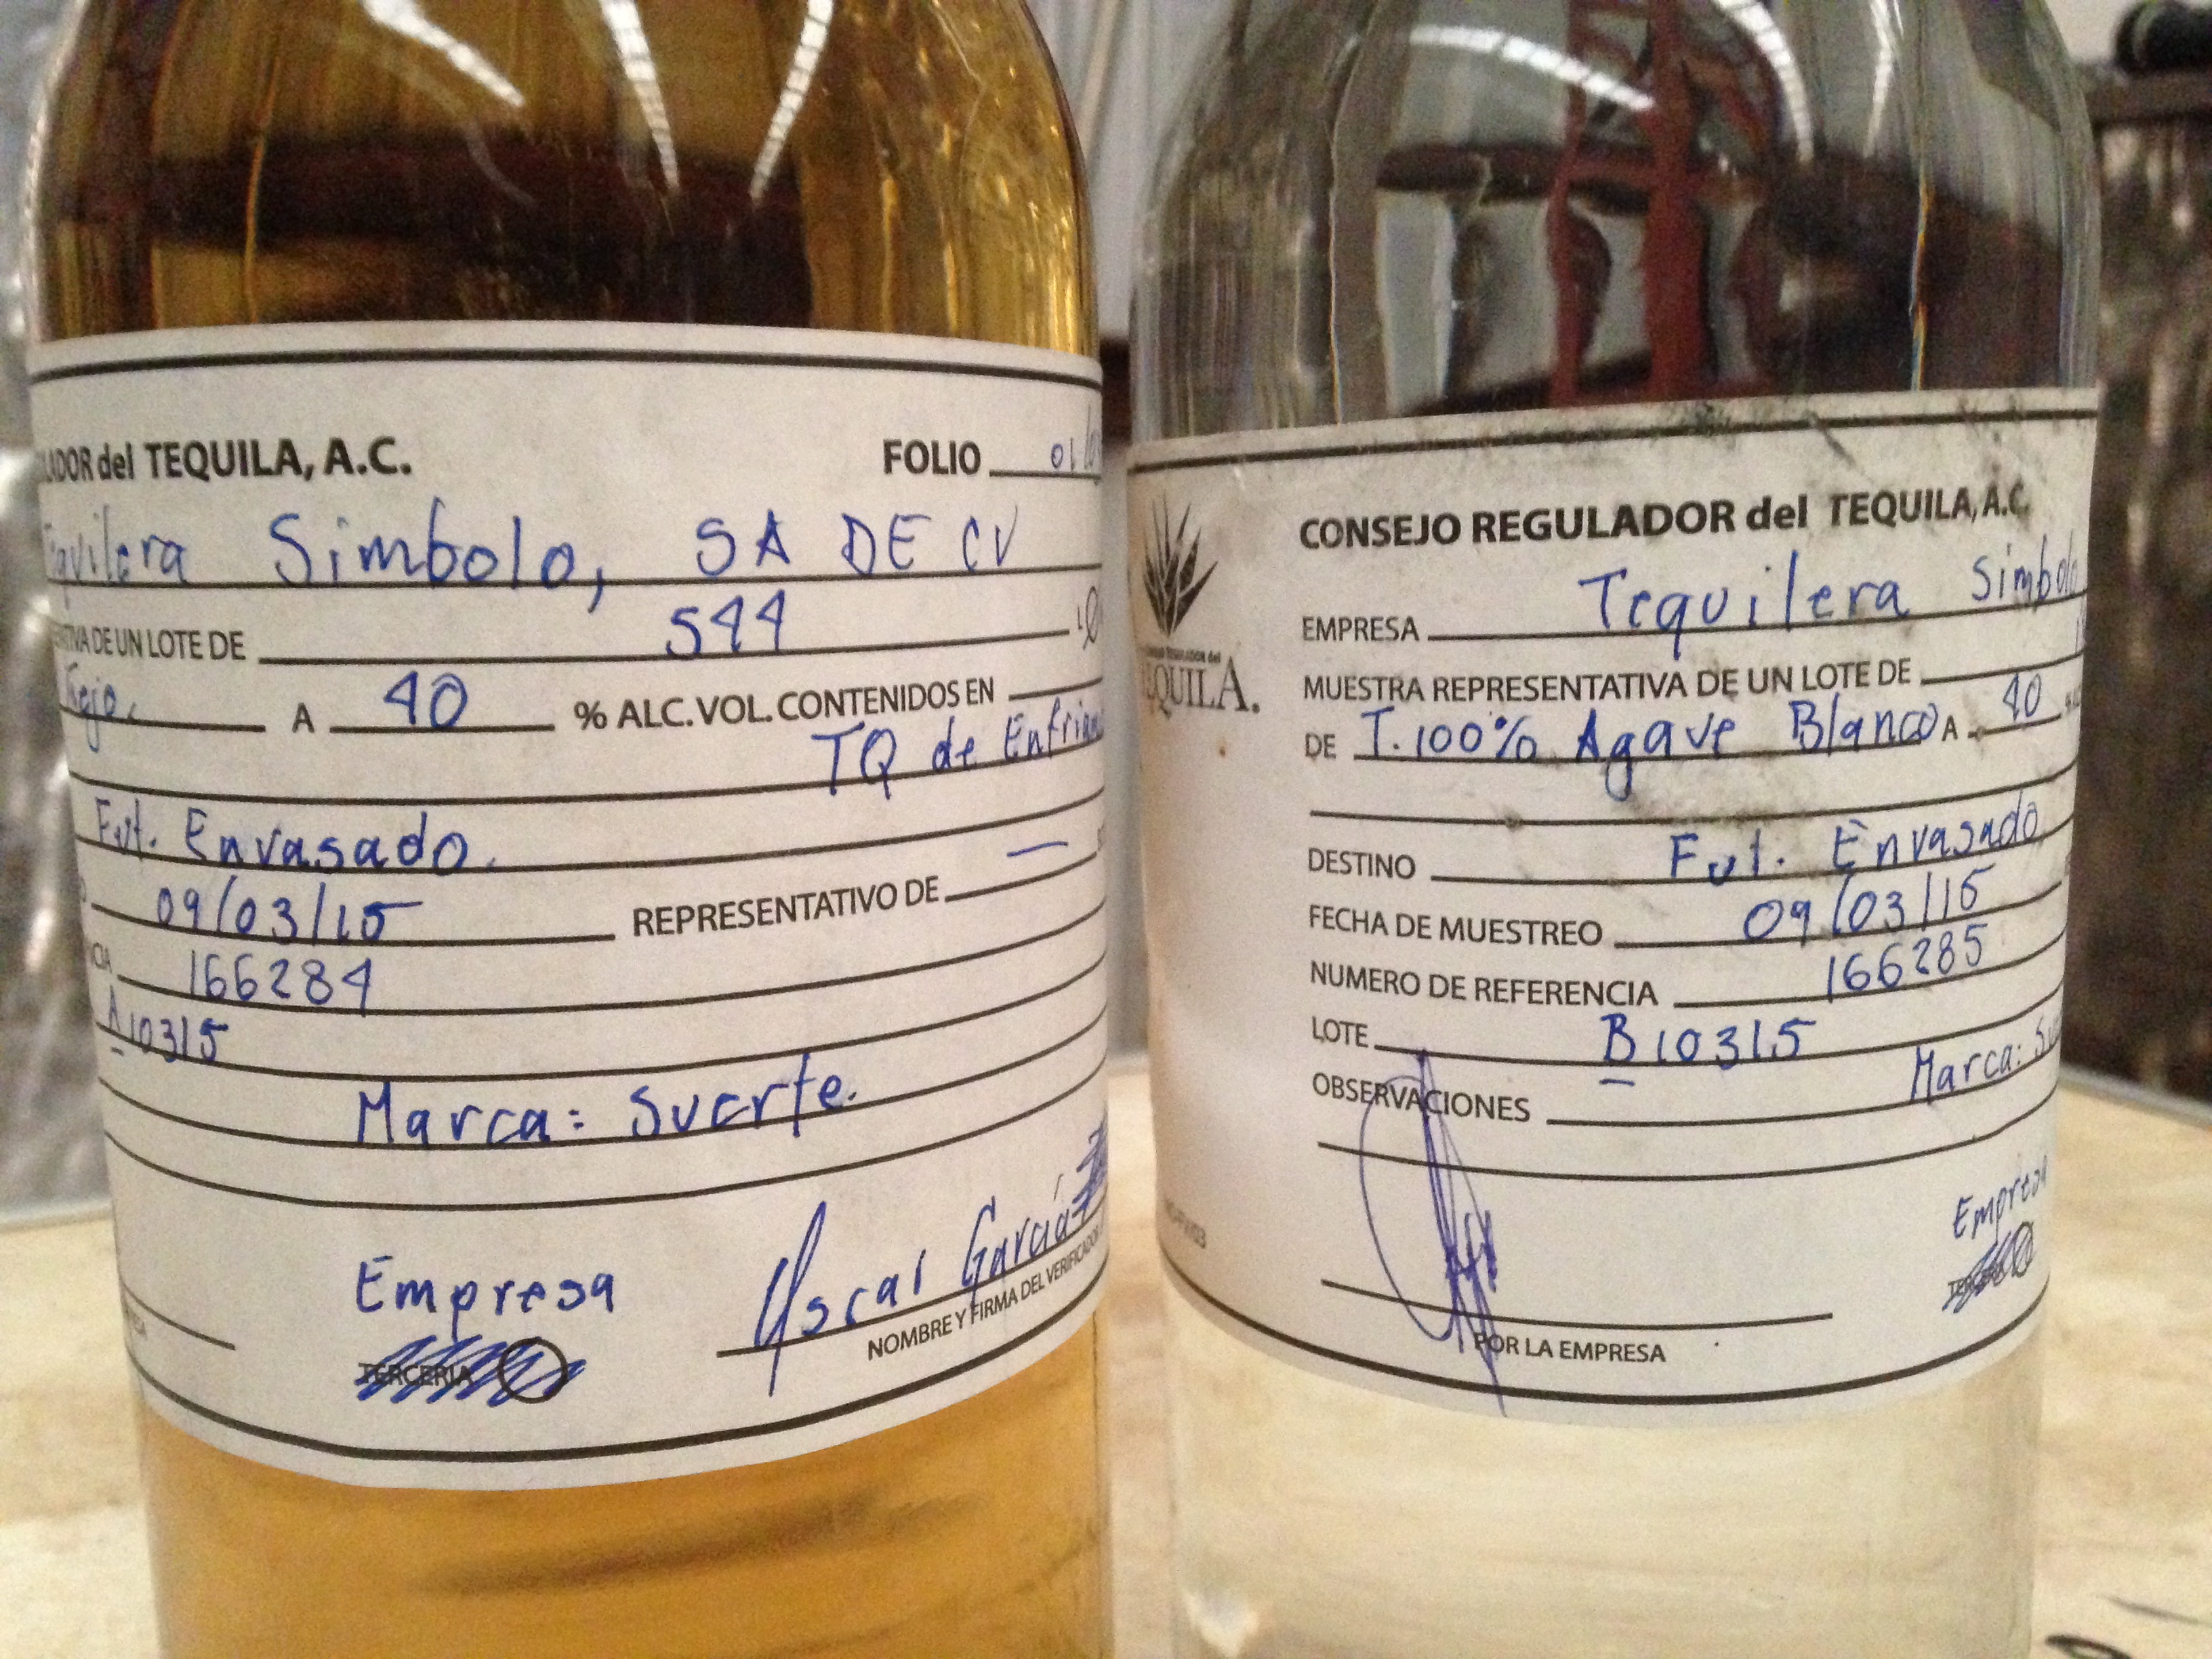 an official, handwritten label over two tequila bottles